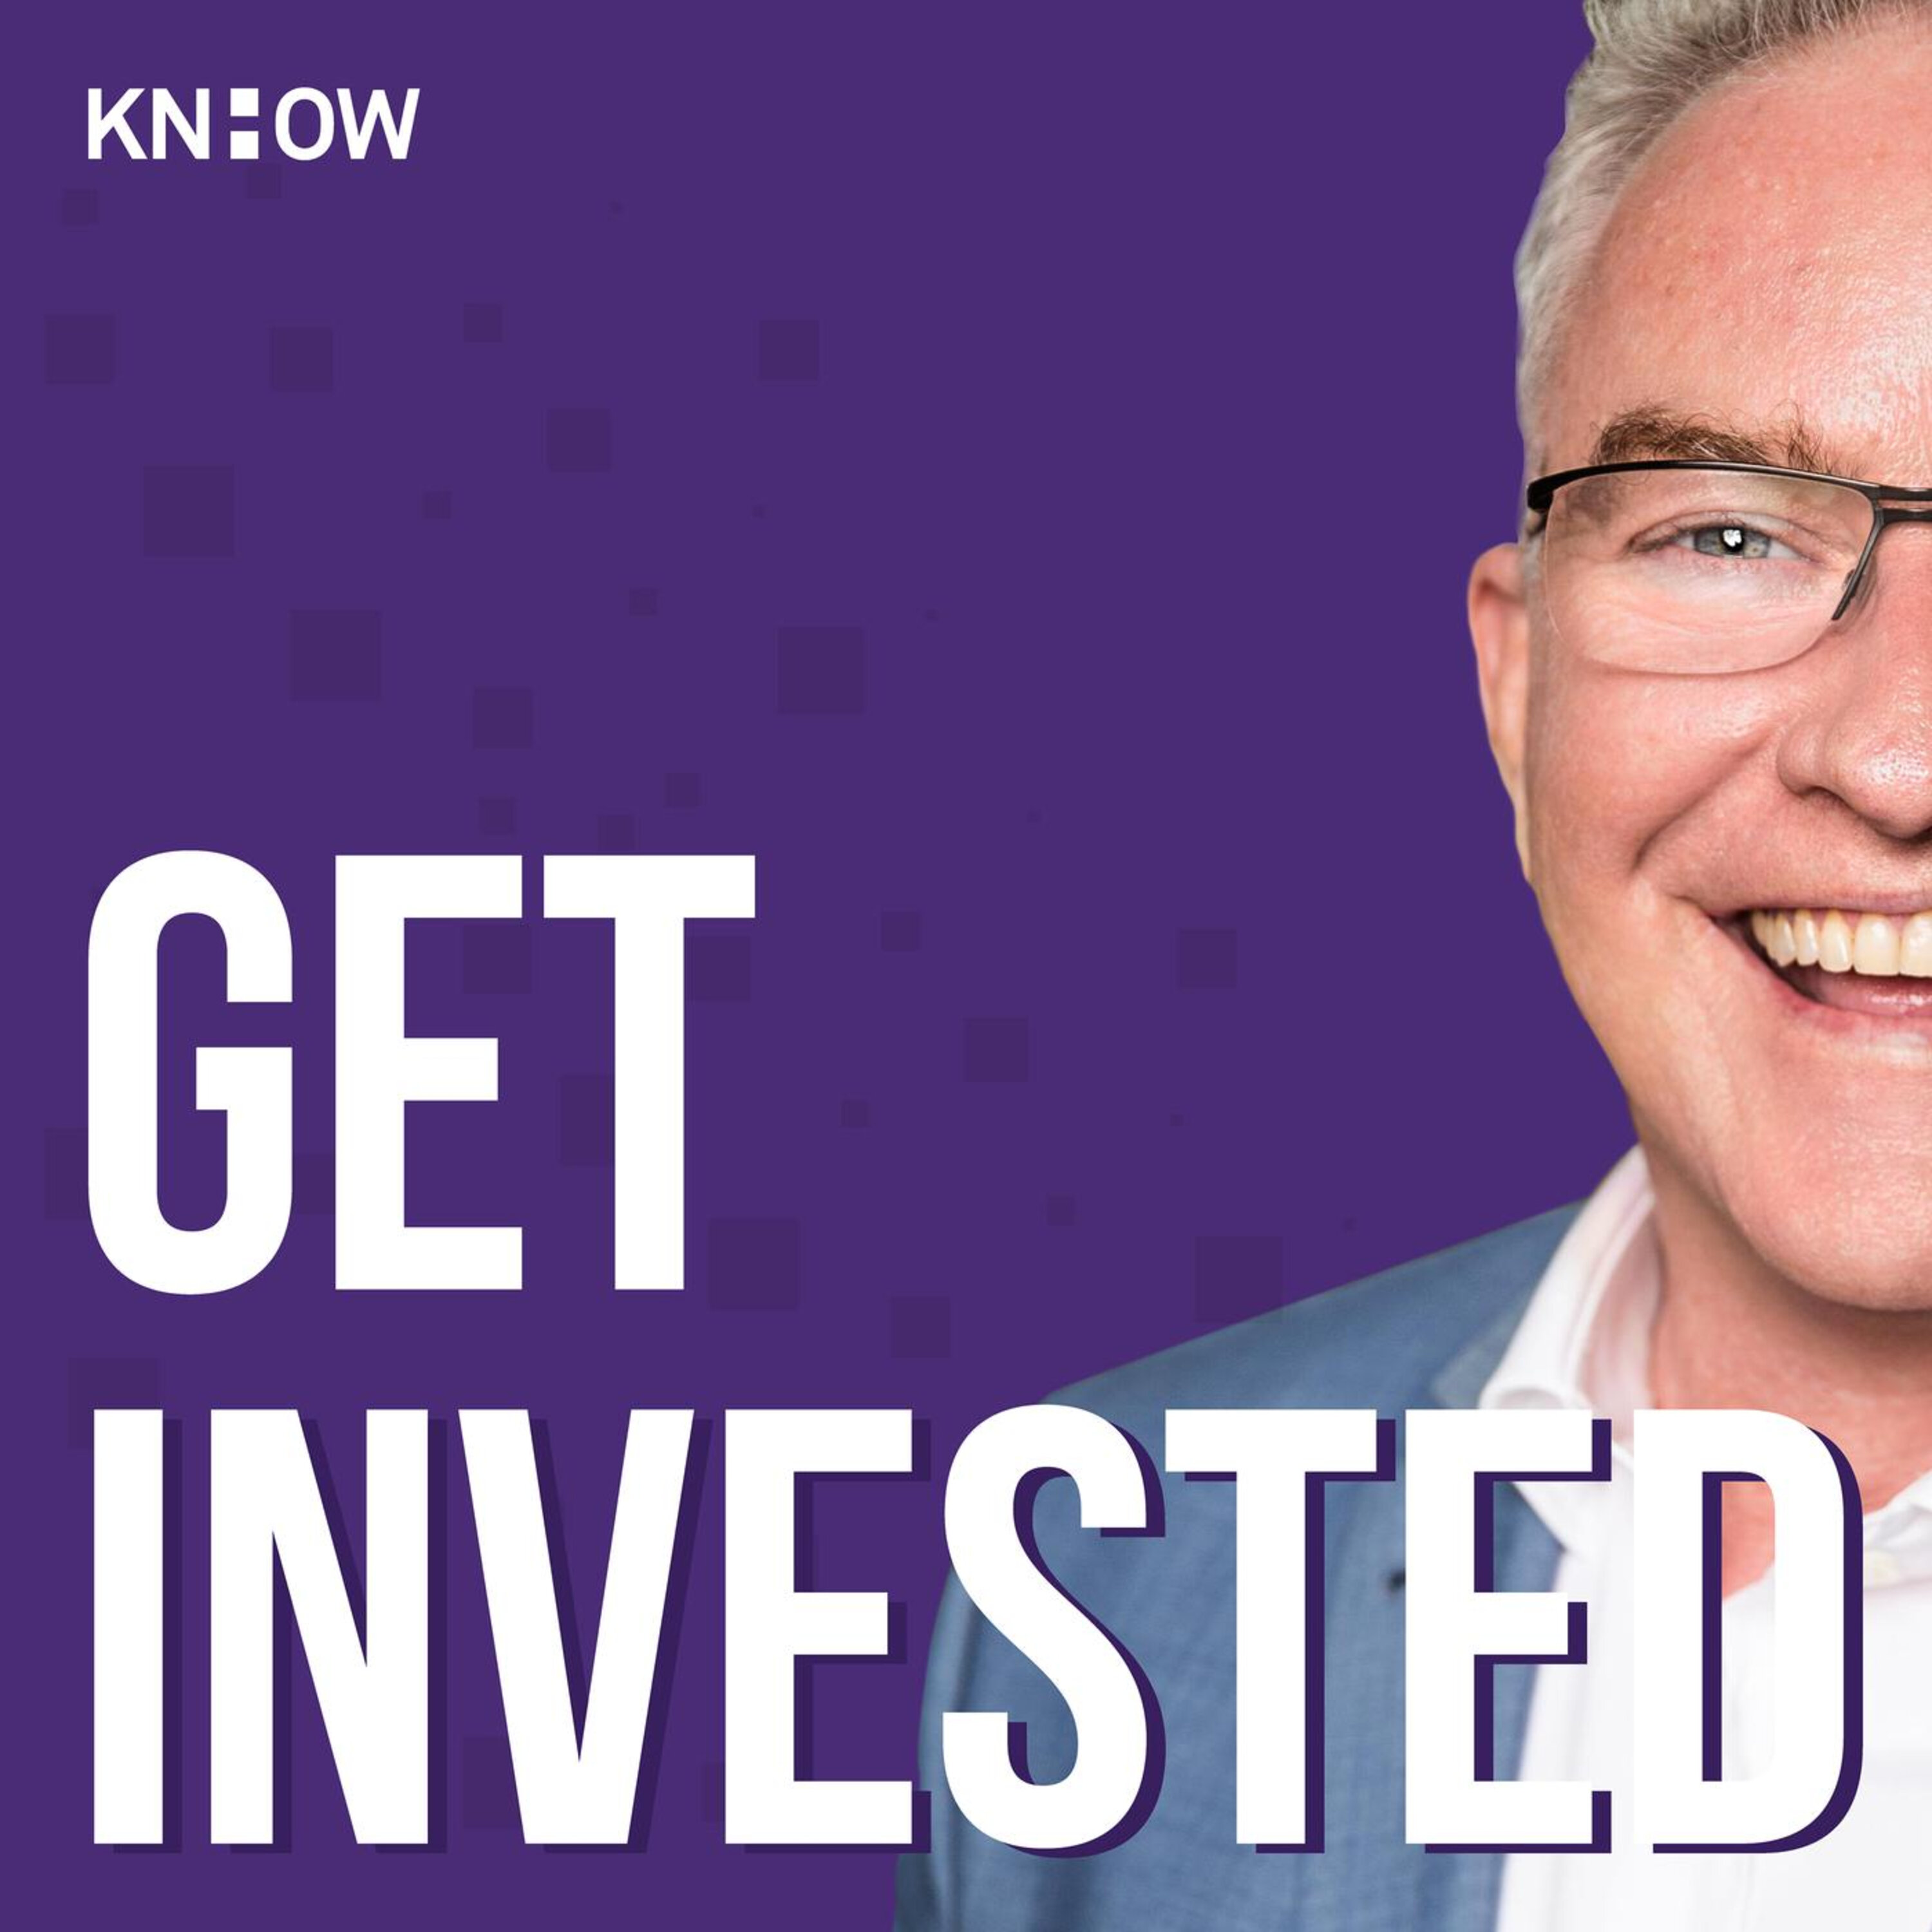 Get Invested: Part 1 - Steve McKnight on becoming a money magnet